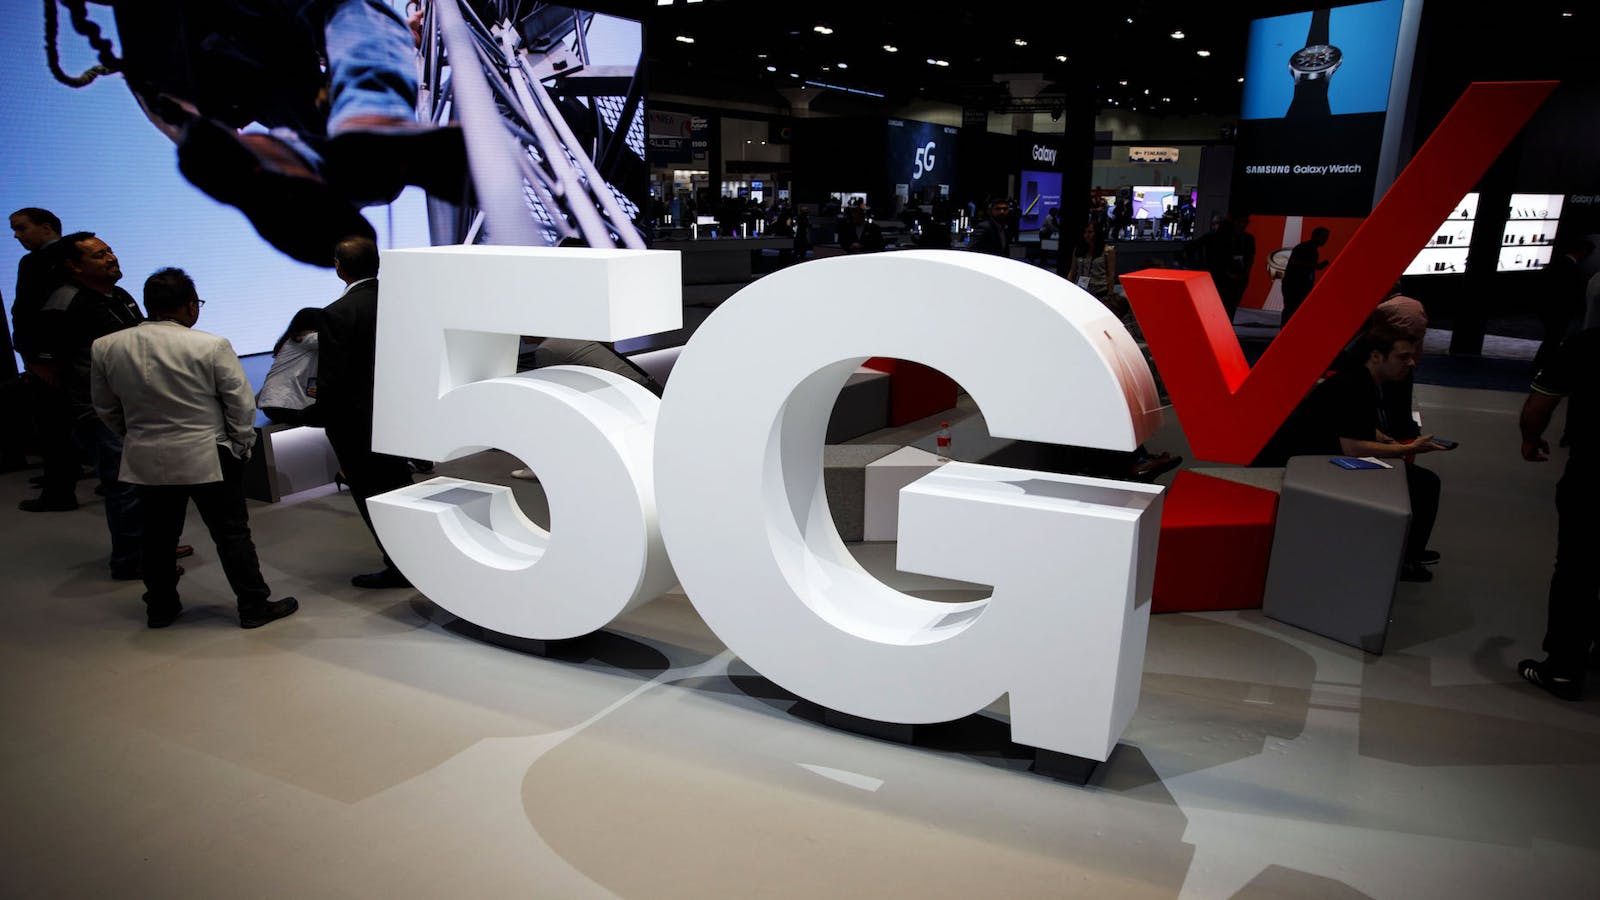 A 5G sign at a Verizon company booth during a 2018 telecoms industry conference in Los Angeles. Photo by Bloomberg.